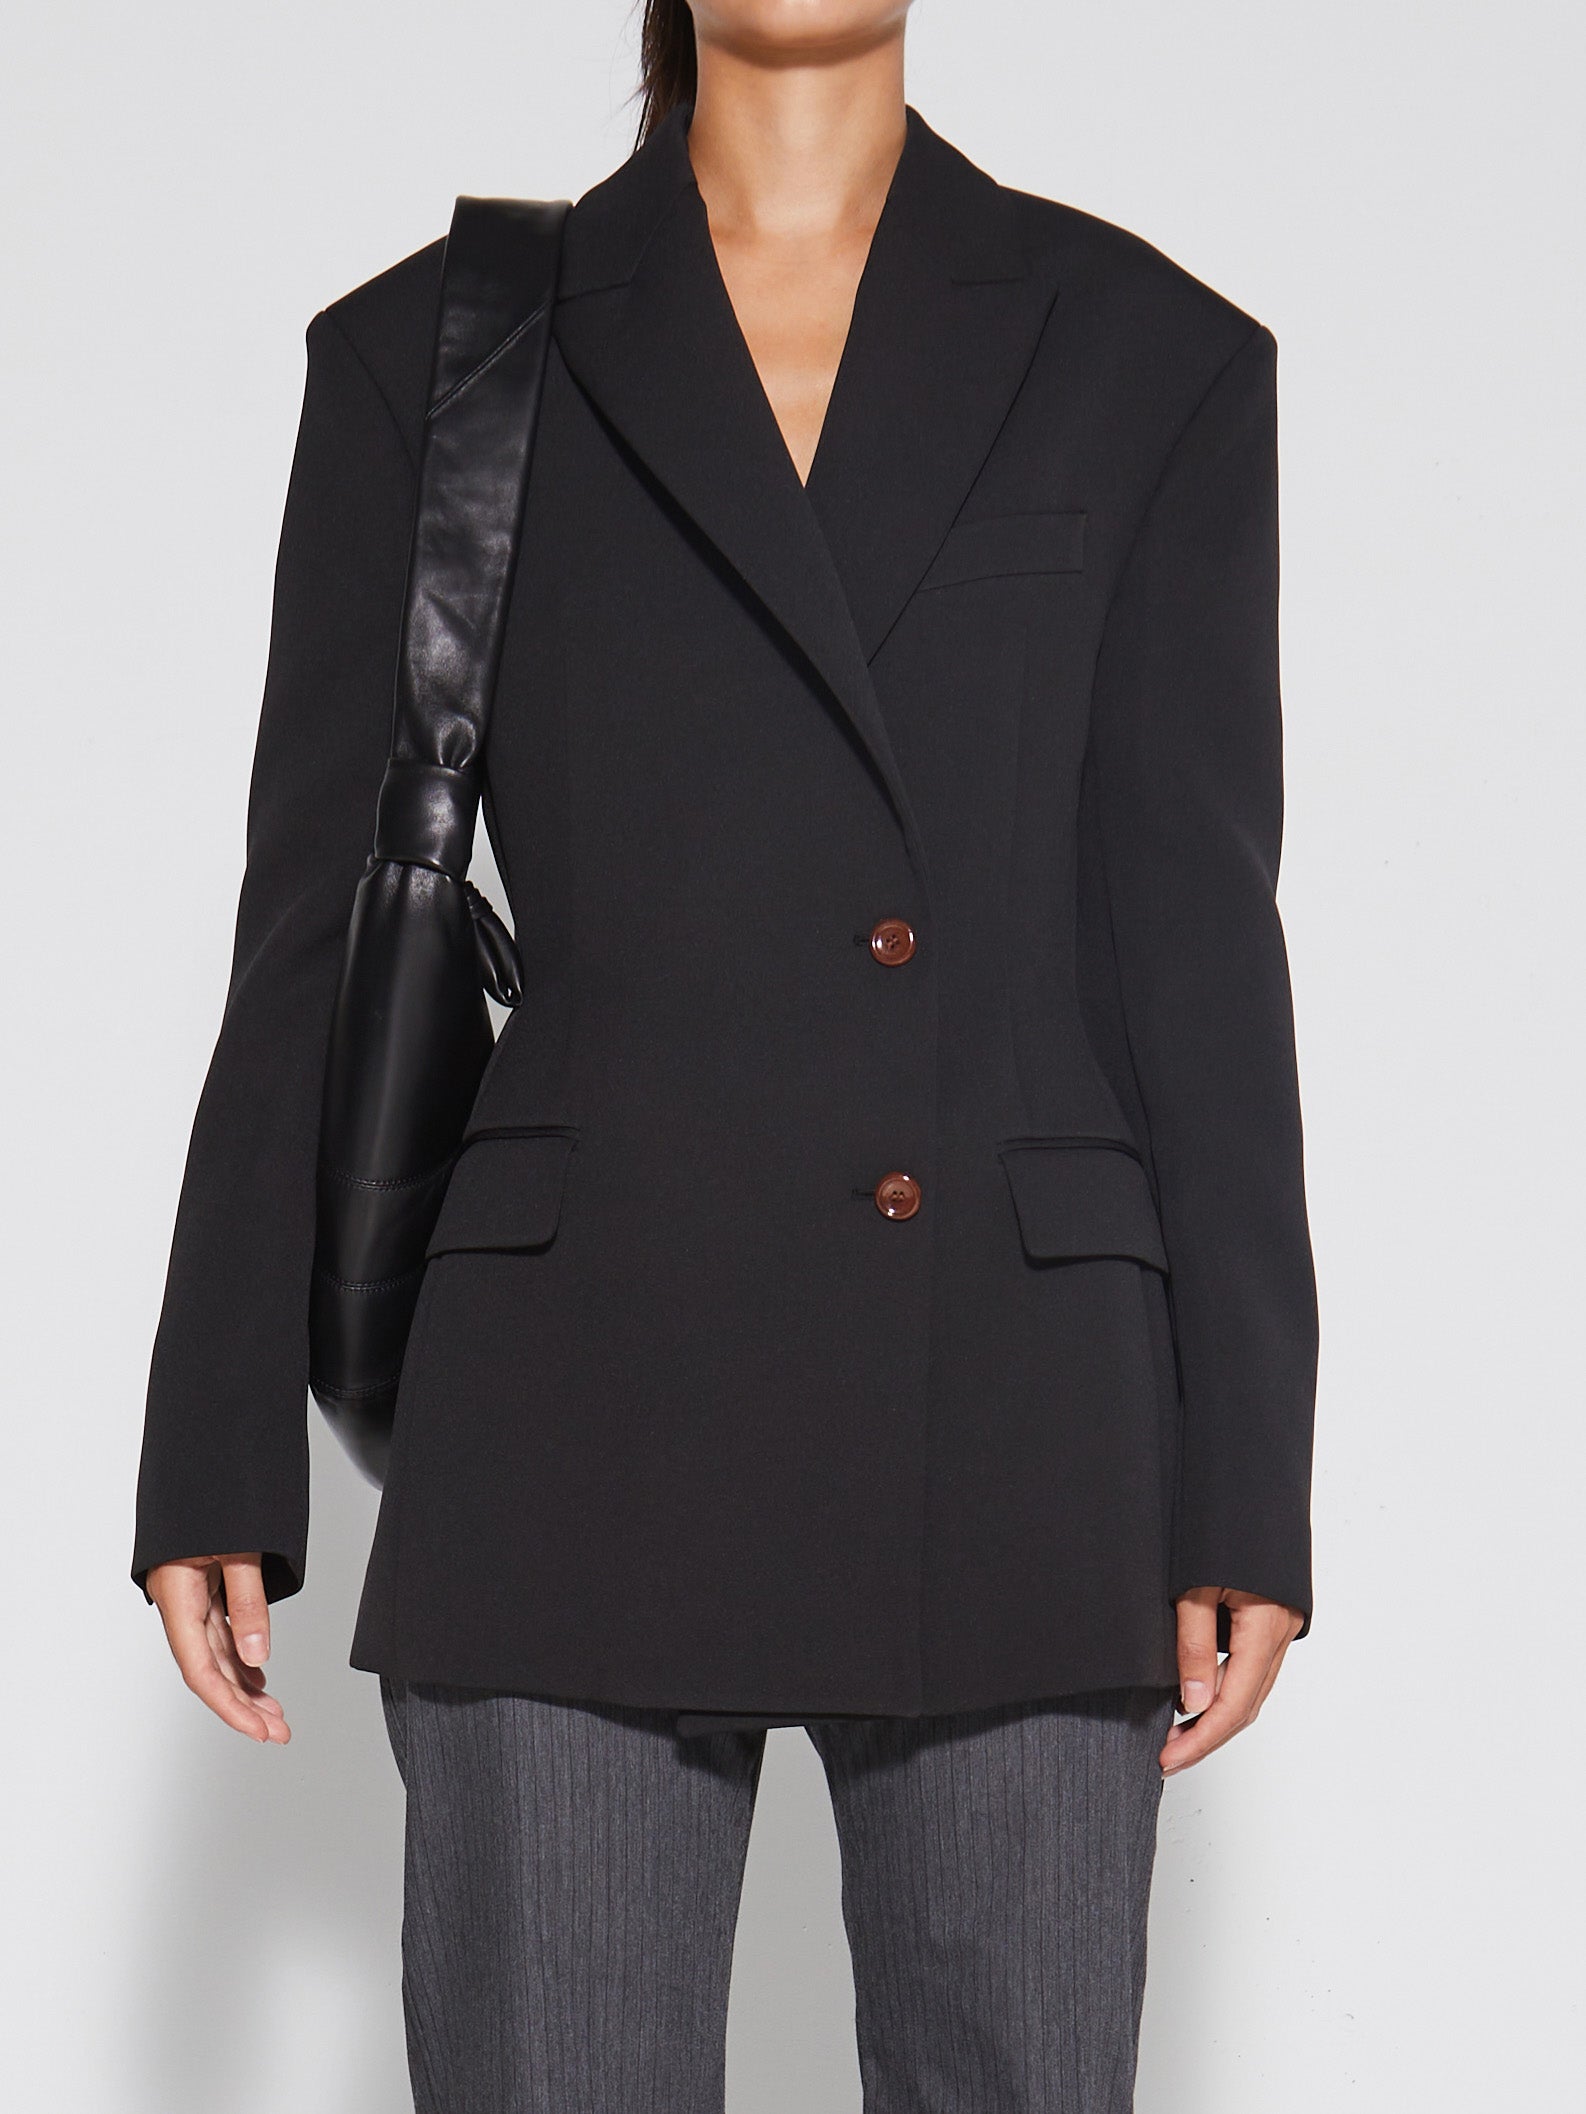 Acne Studios - Double Breasted Suit Jacket in Black